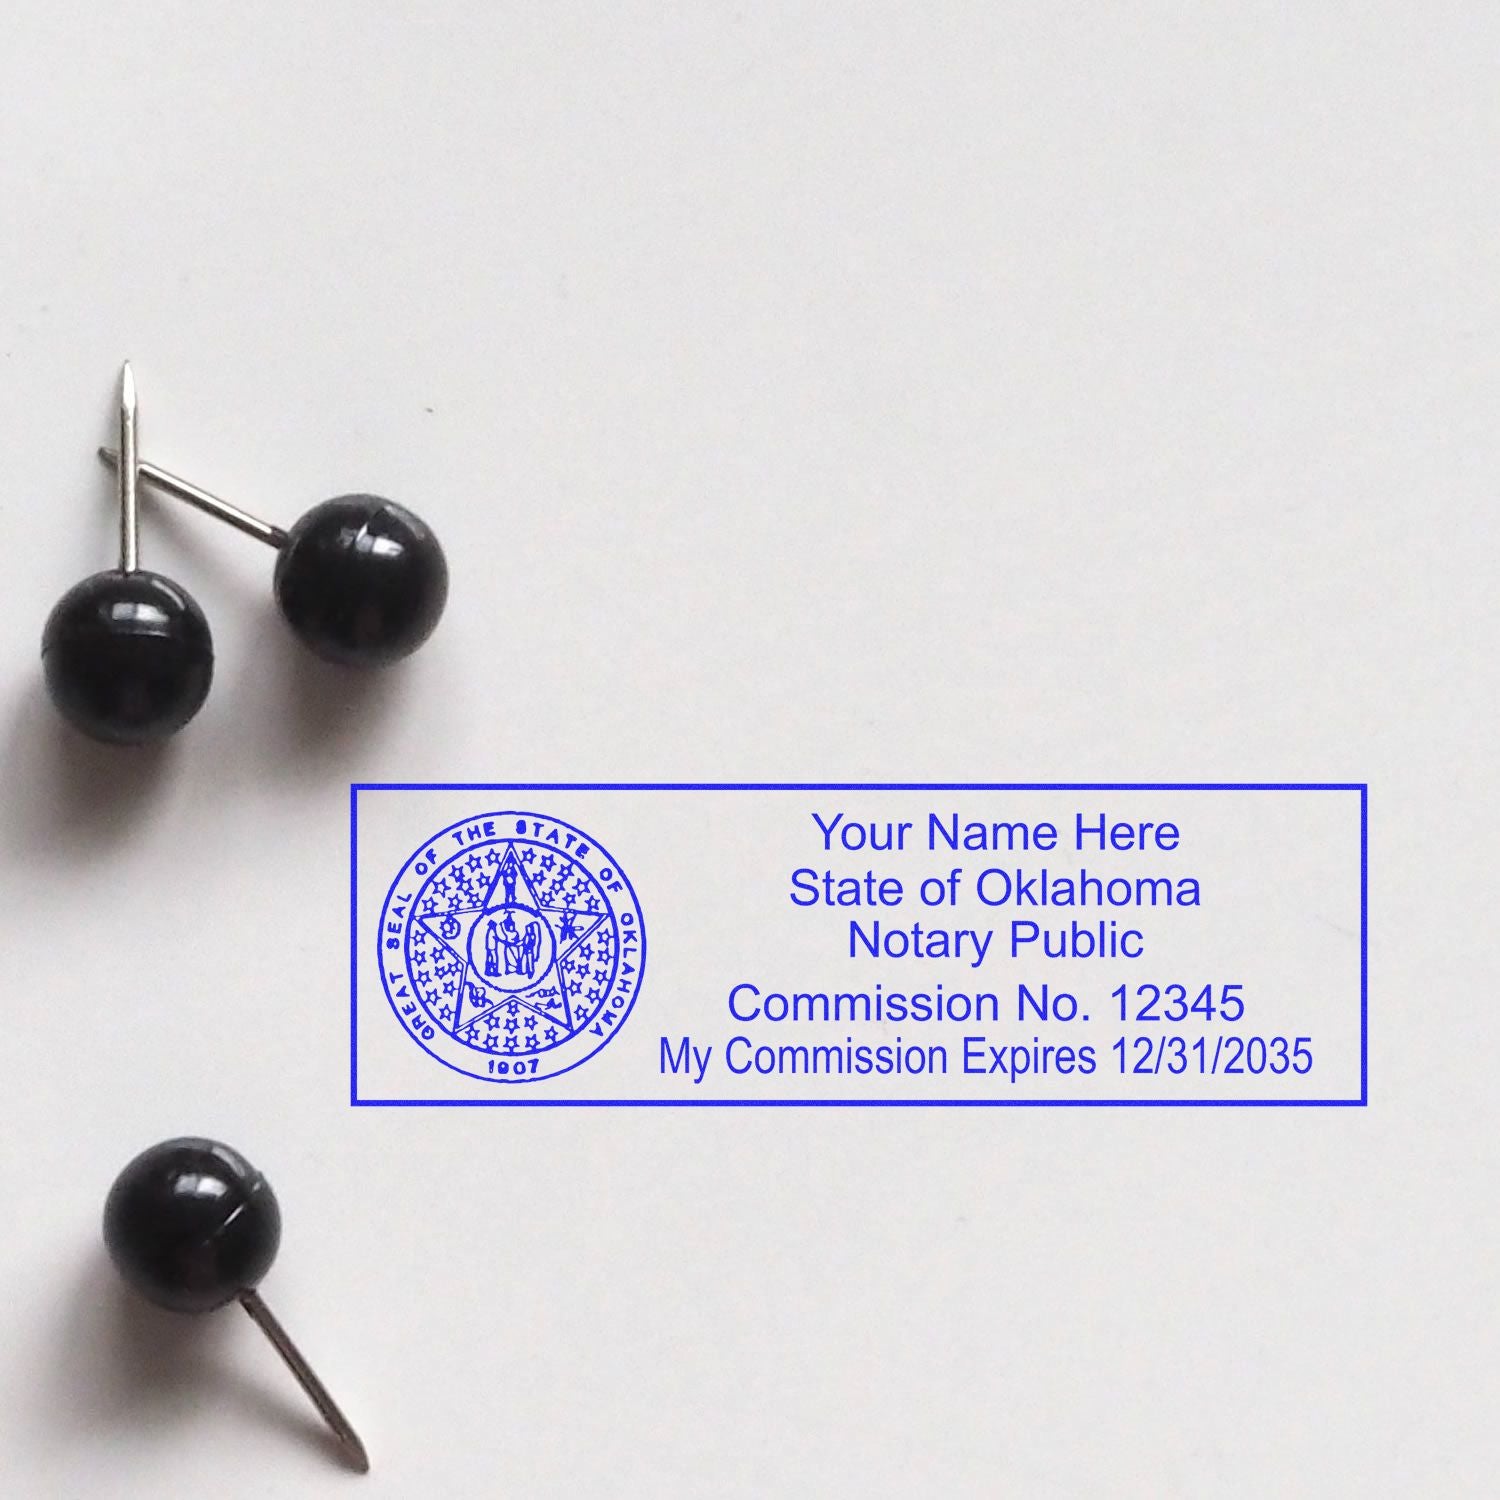 This paper is stamped with a sample imprint of the Slim Pre-Inked State Seal Notary Stamp for Oklahoma, signifying its quality and reliability.